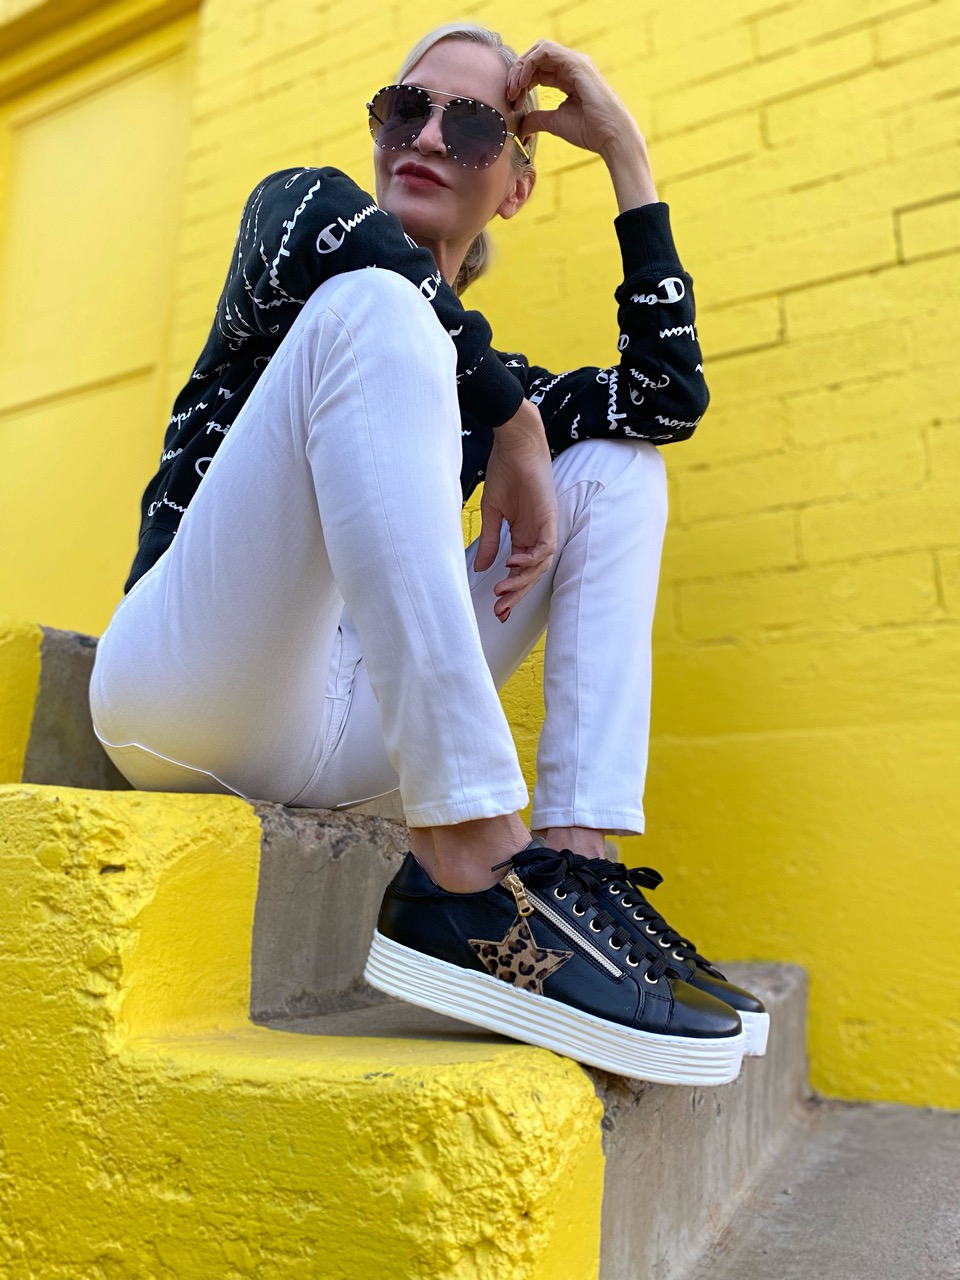 Lifestyle Influencer, Jamie Lewinger of More Than Turquoise, wearing Star sneakers in black leather & luxe leopard from Sole bliss